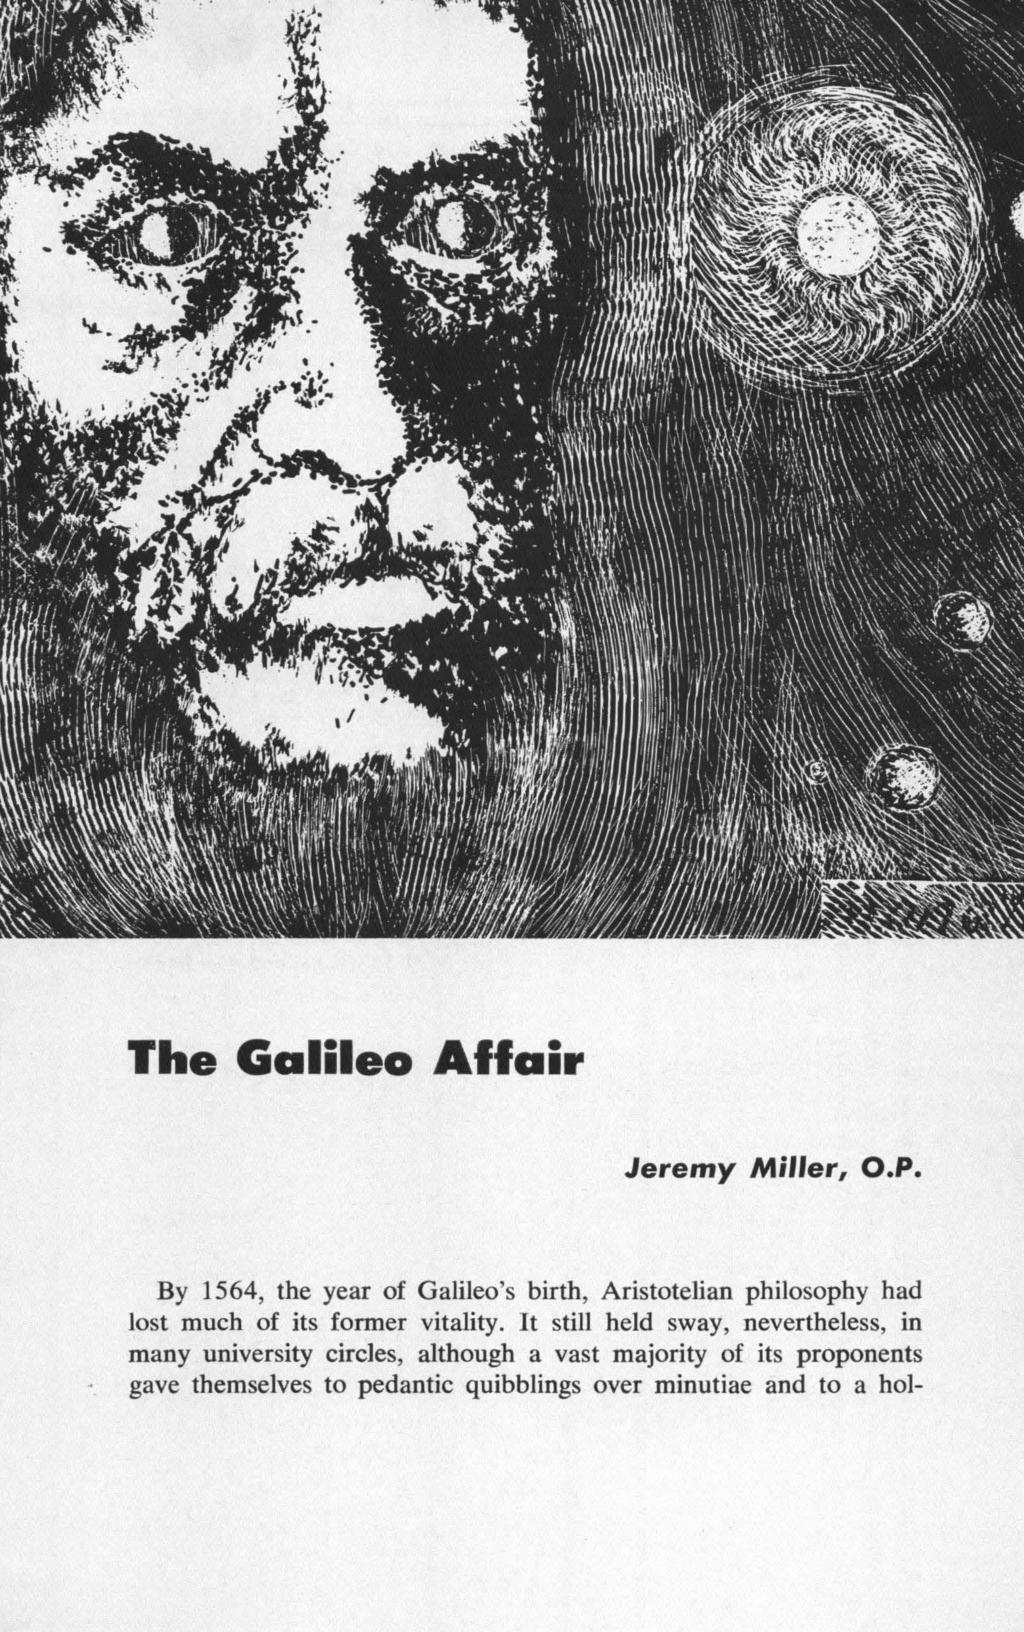 The Galileo Affair Jeremy Miller, O.P. By 1564, the year of Galileo's birth, Aristotelian philosophy had lost much of its former vitality.